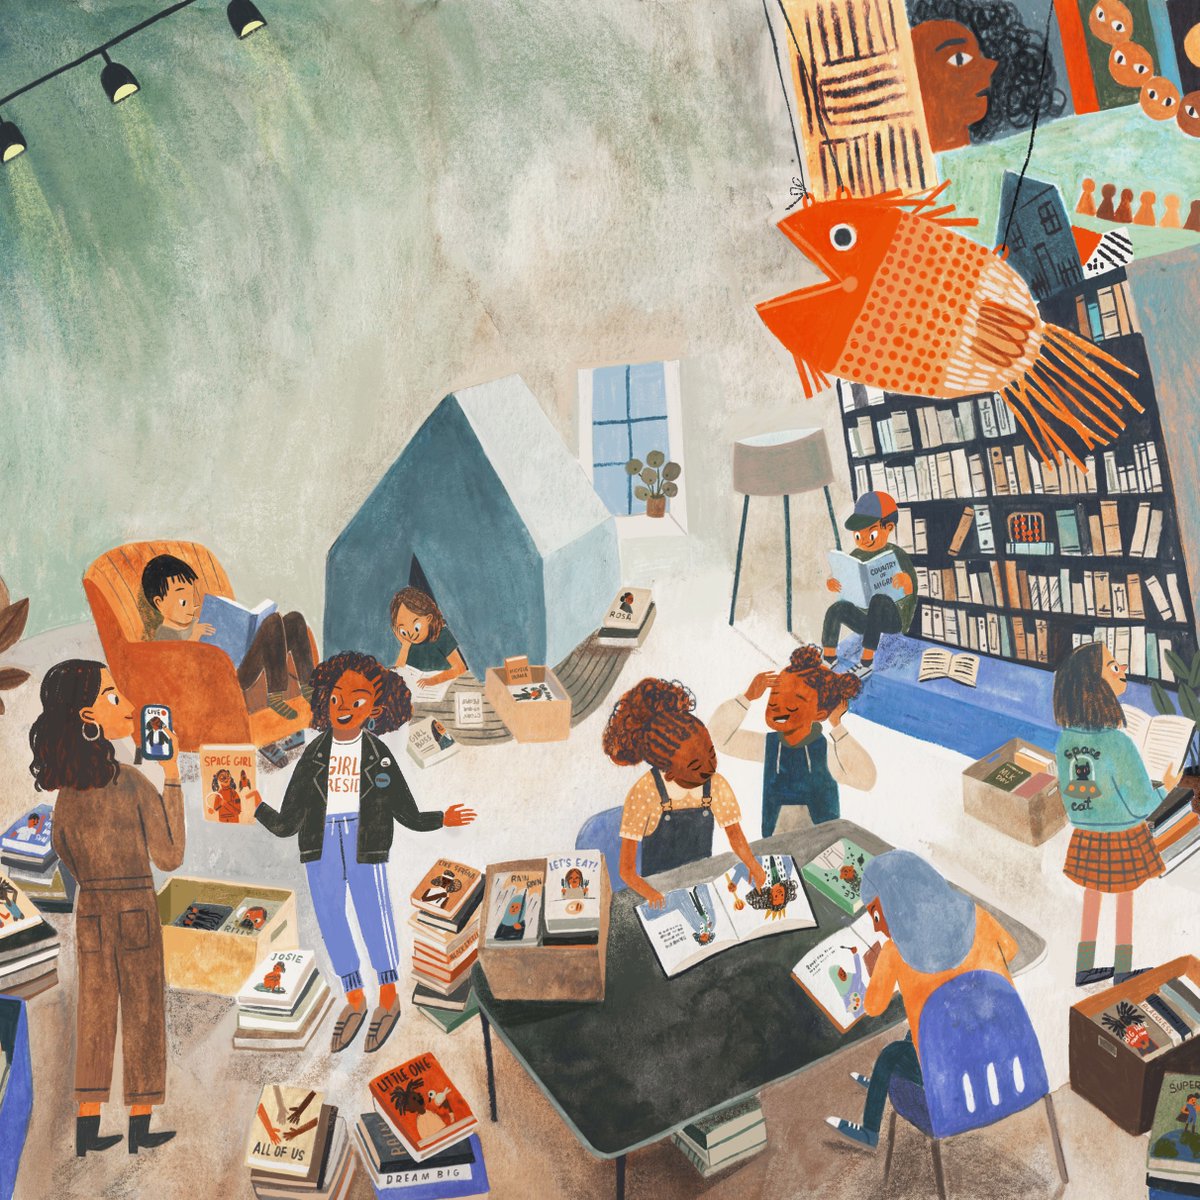 Friends and books... doesn't get better than that | Illustration by #BrightArtist @yasimamura